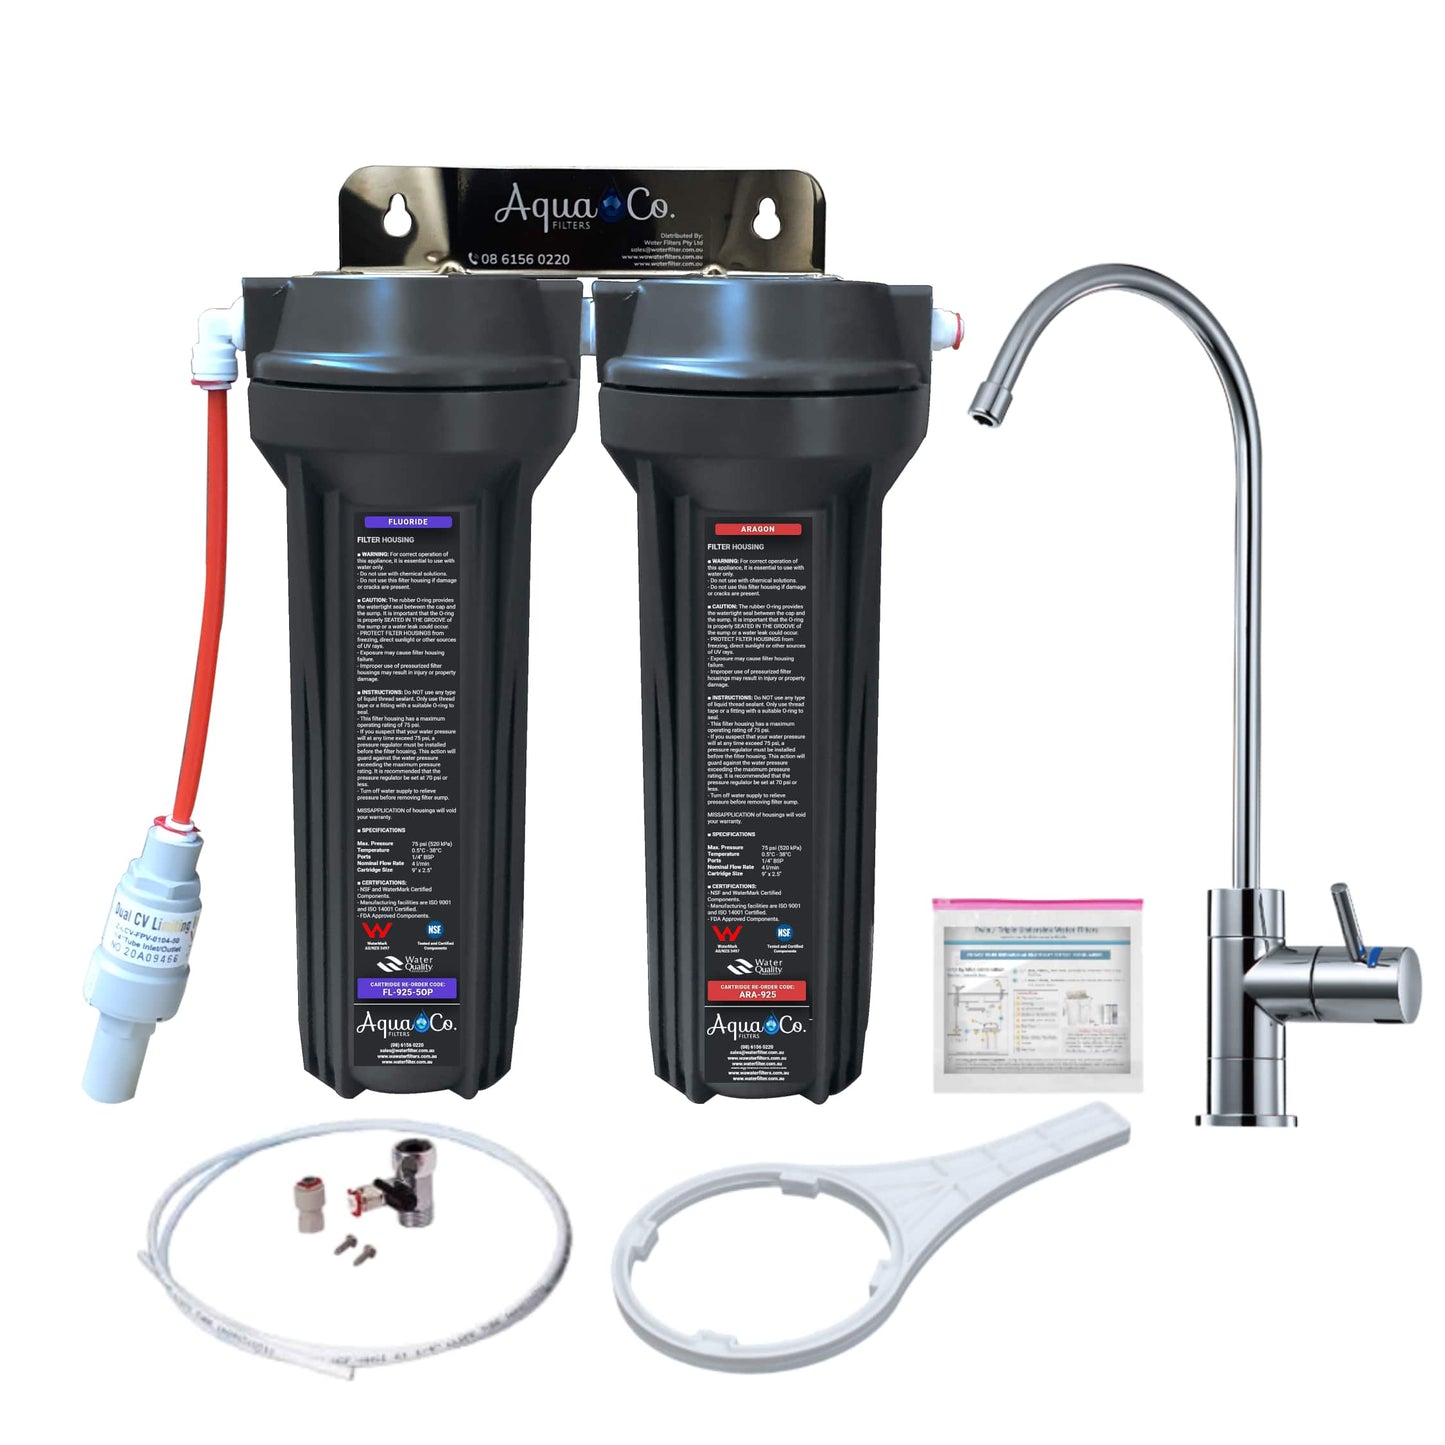 AquaCo SYS-925FA Undersink Water Filter - Reduces Chlorine, Taste, Odours, Parasites, Bacteria, Lead and Fluorides.